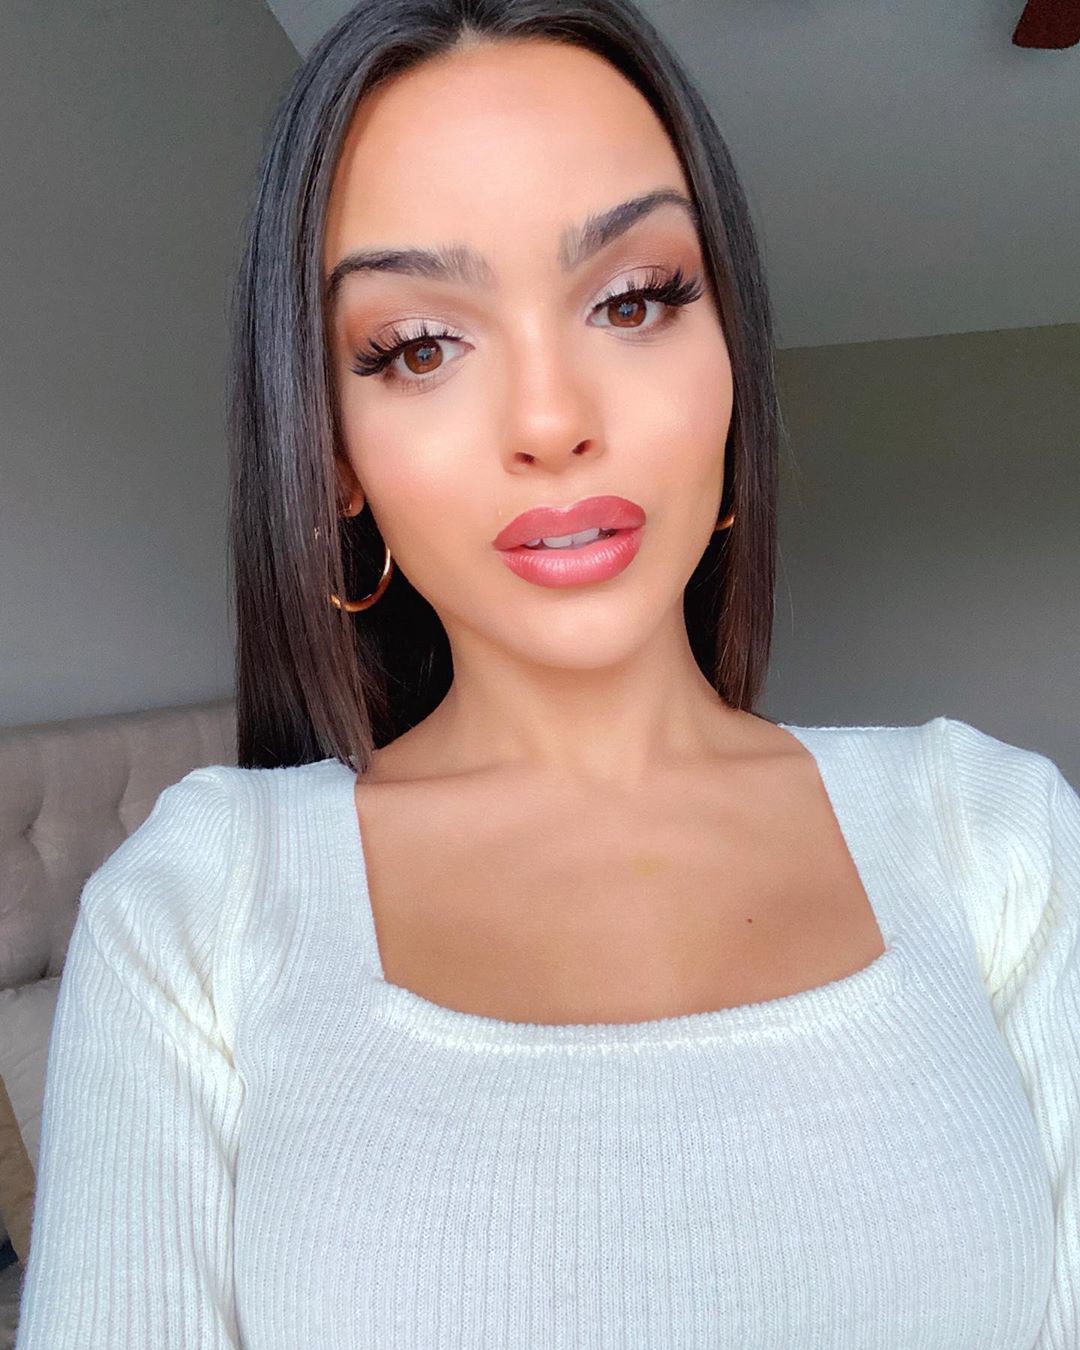 Lisa Ramos Pretty Face, Lips Smile, Hairstyle For Women: Instagram girls,  Hairstyle Ideas,  Cute Instagram Girls  